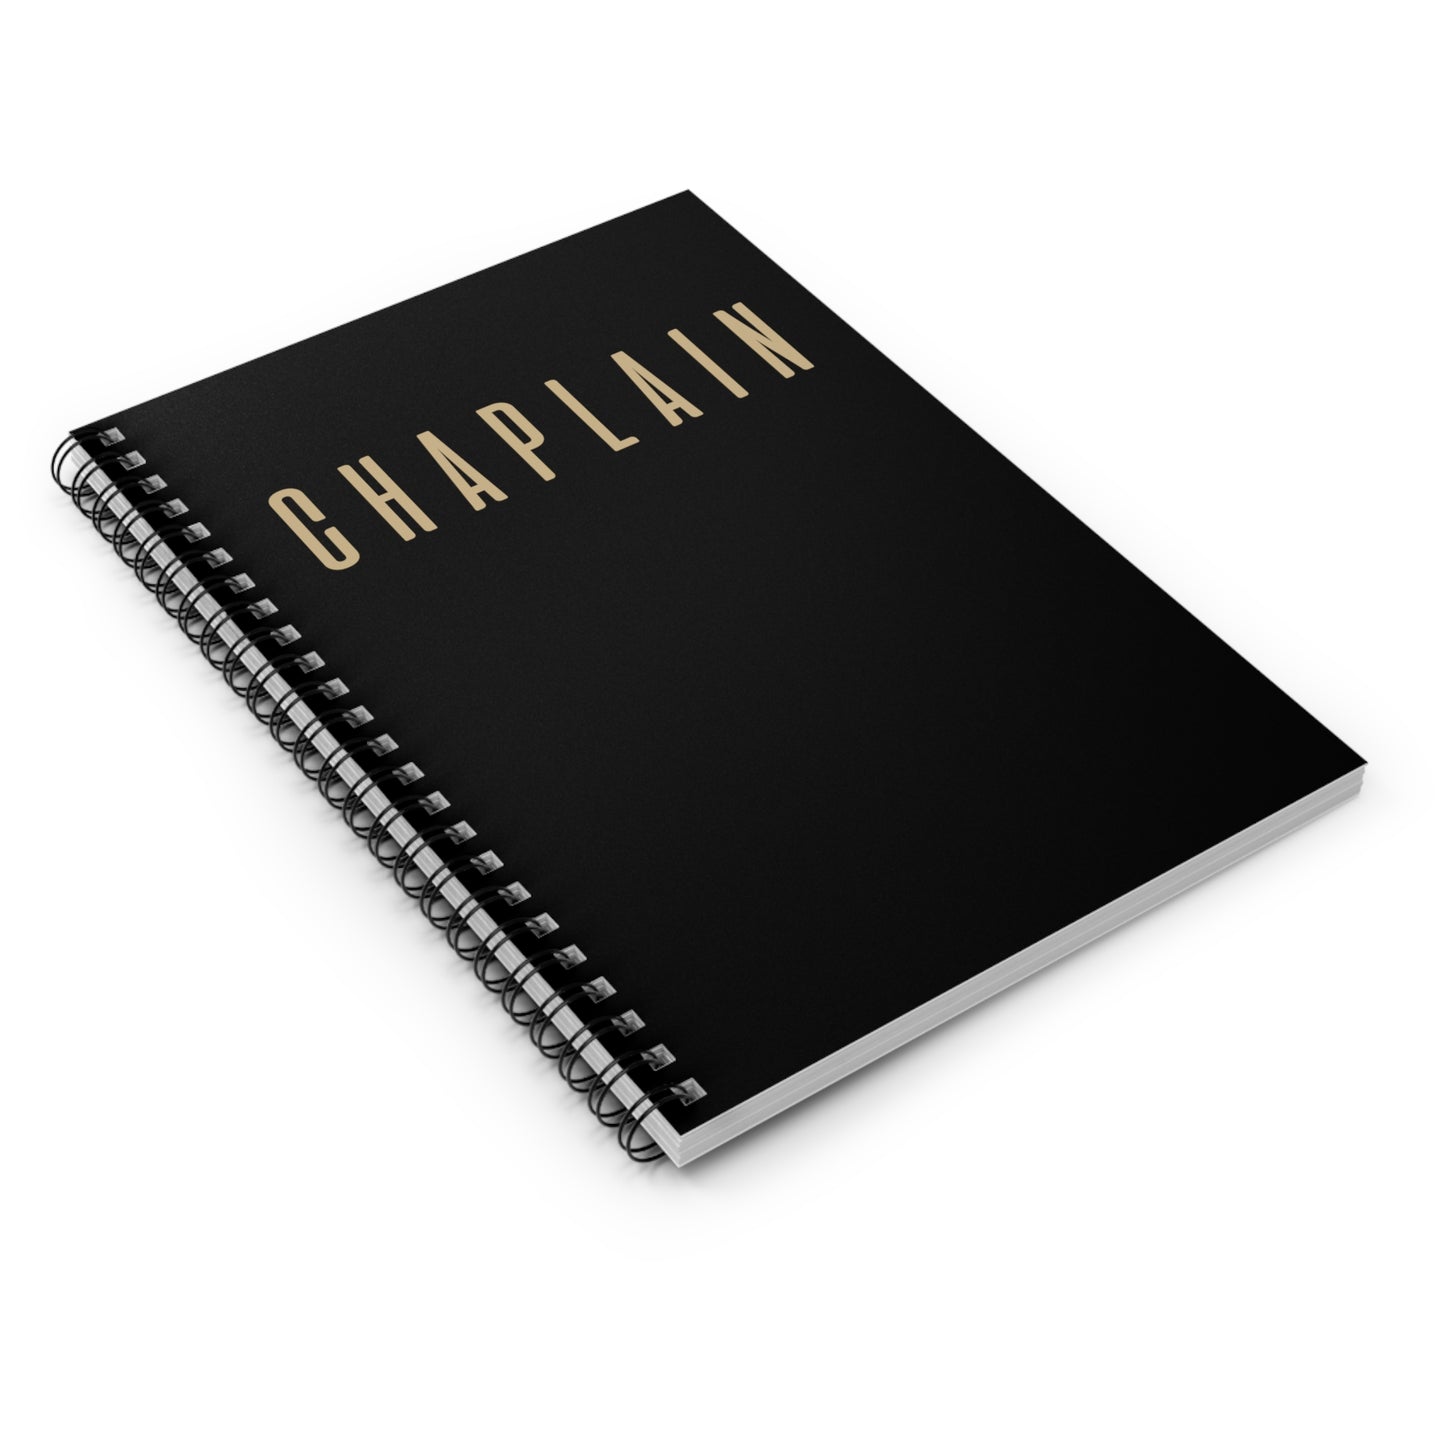 Chaplain Spiral Notebook - Ruled Line, Chaplain Gifts by Chaplain Life®